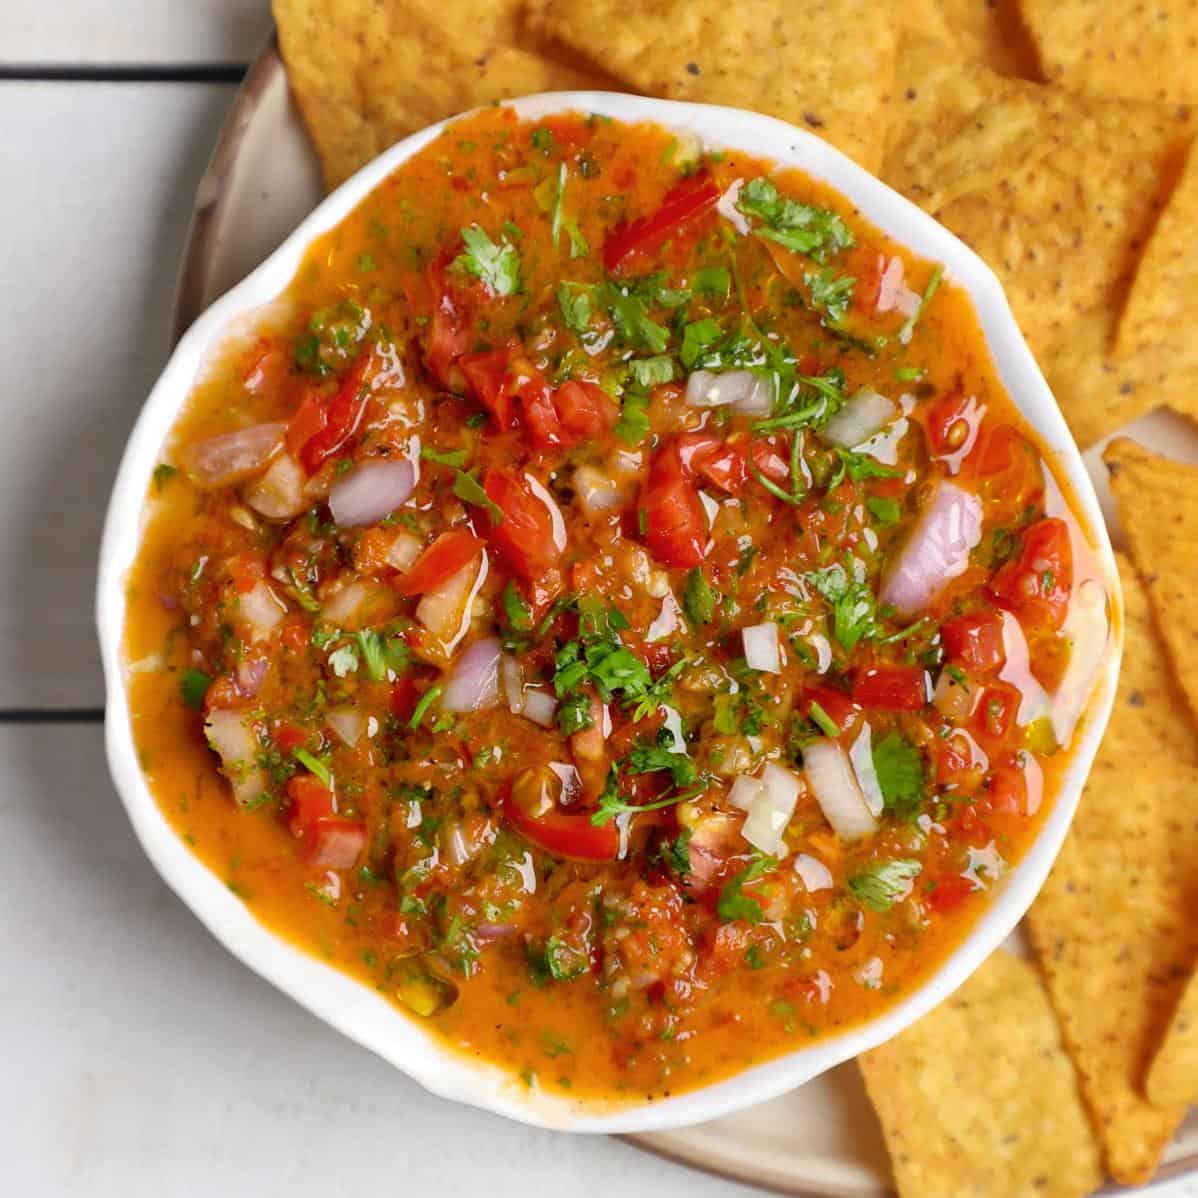  Fresh, juicy tomatoes are the star of this delicious salsa!